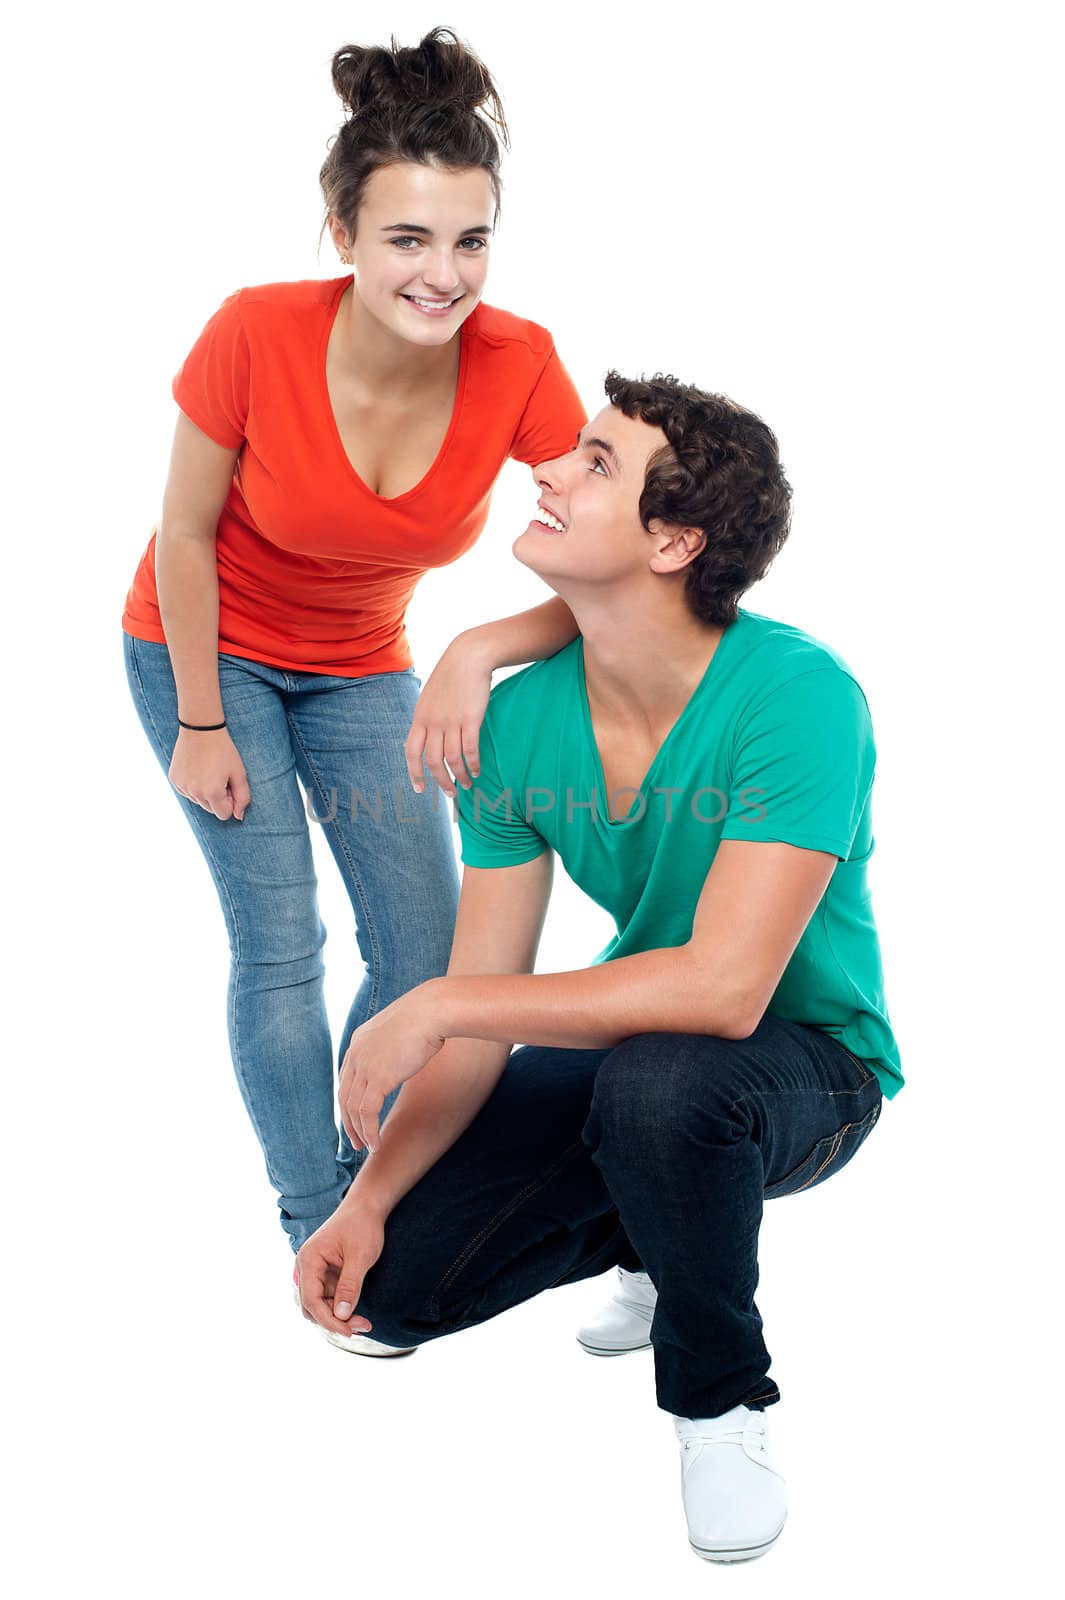 Adorable teenage love couple posing together by stockyimages